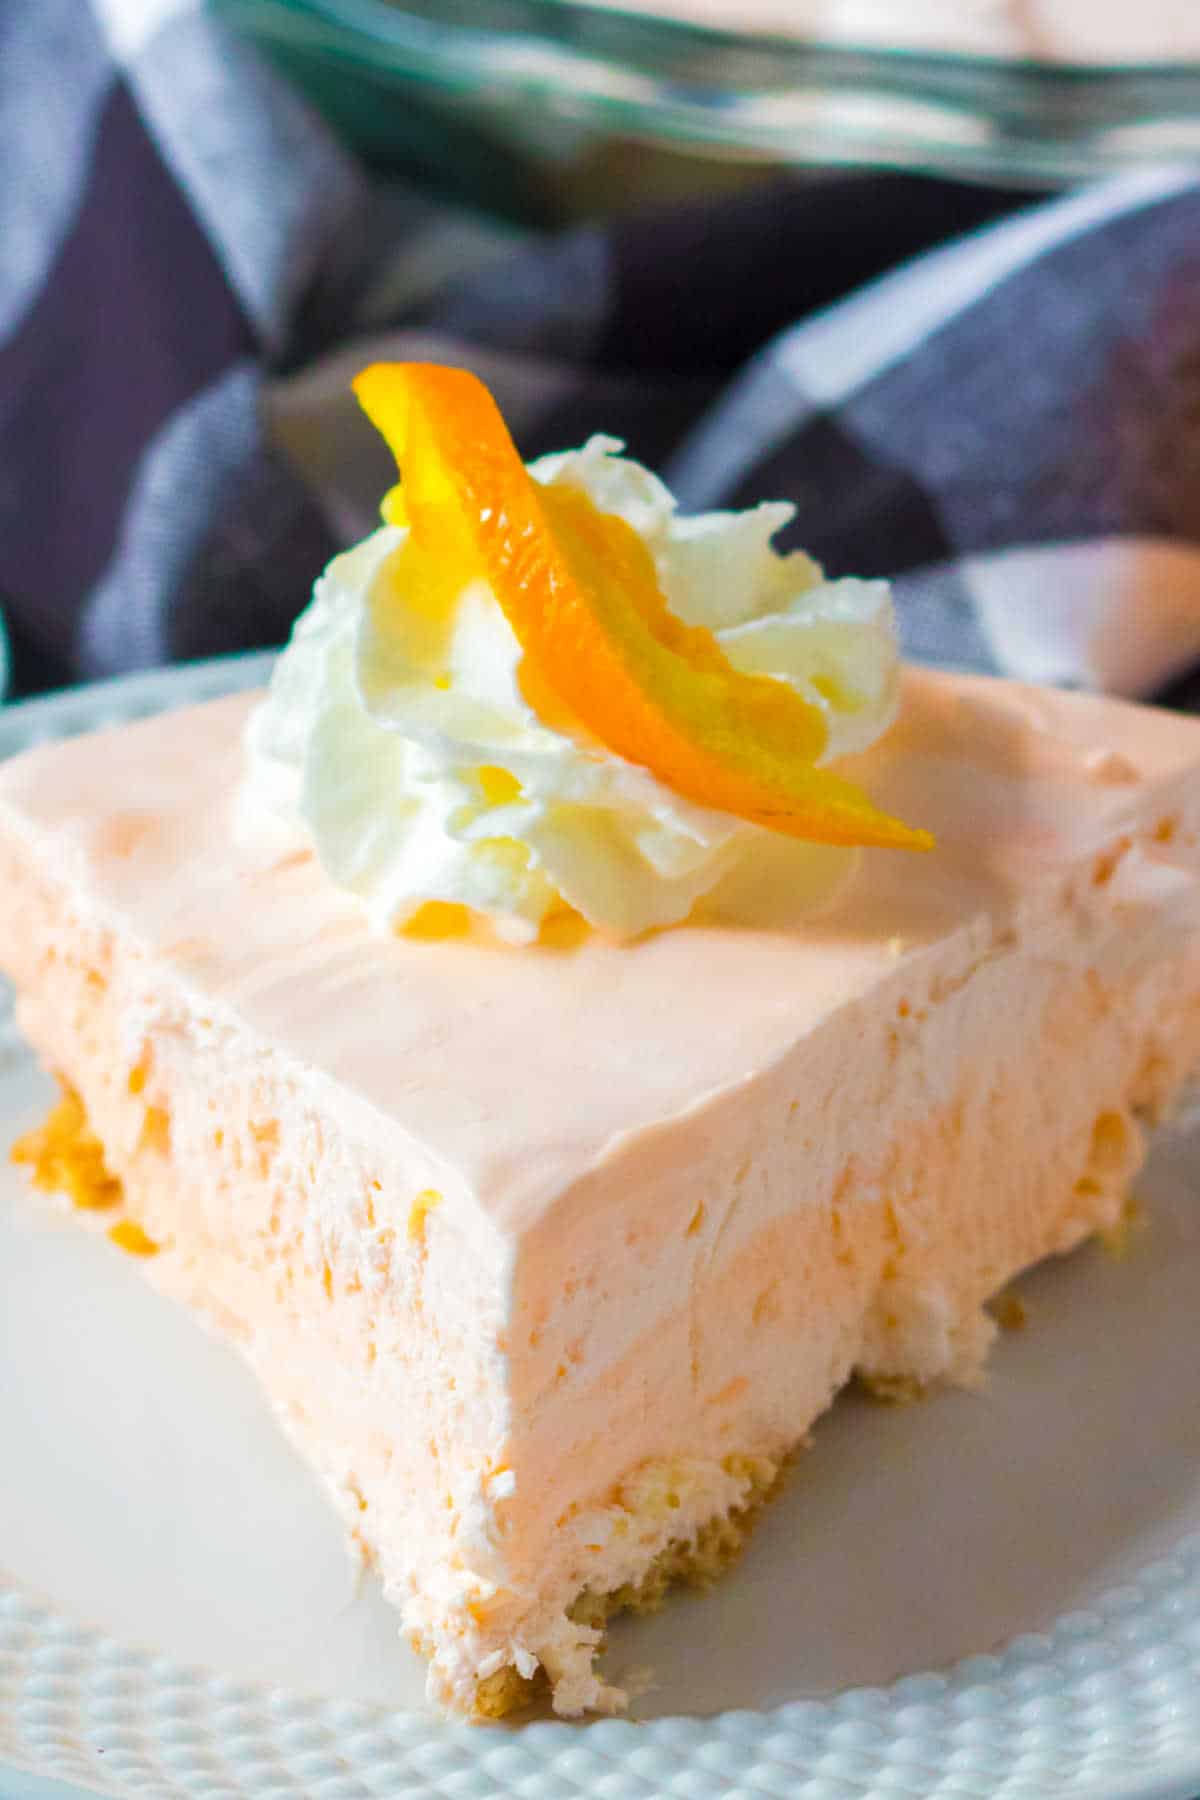 A slice of orange creamsicle pie on a plate.